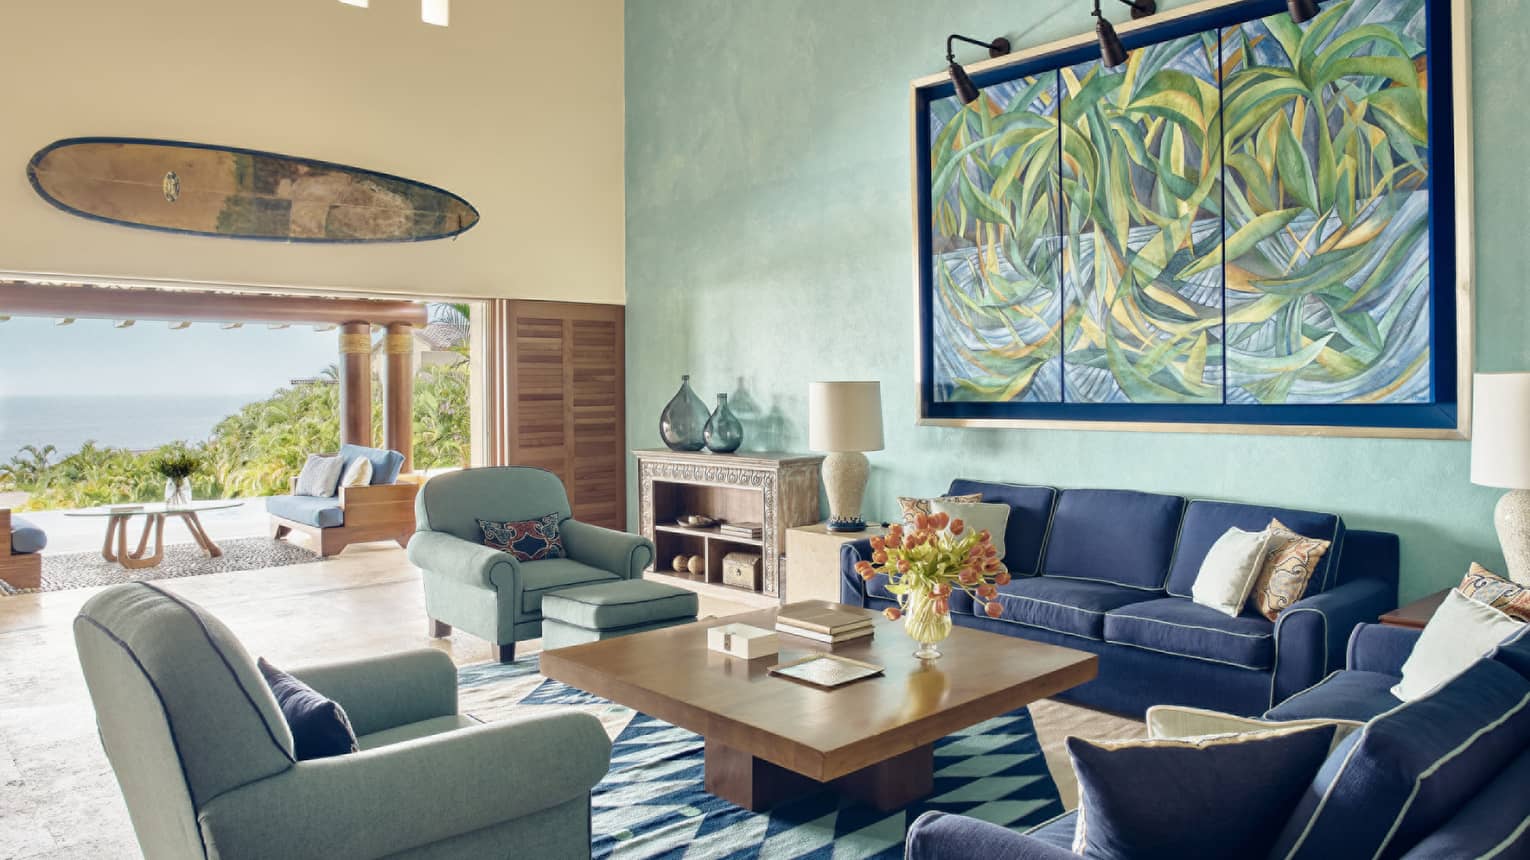 Living room with blue sofas, turquoise chairs and matching accent wall